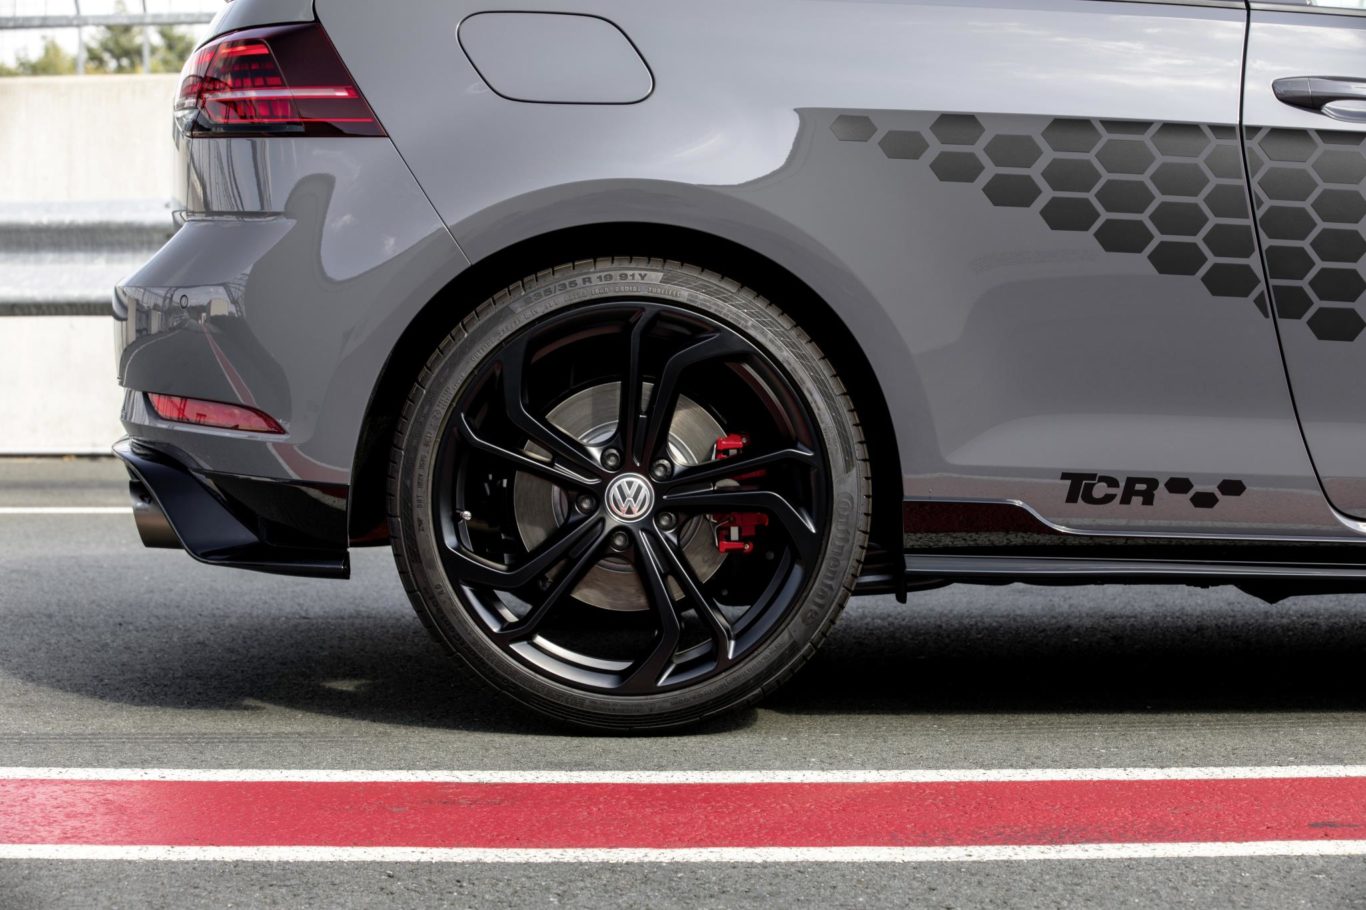 The TCR gets upgraded brake discs